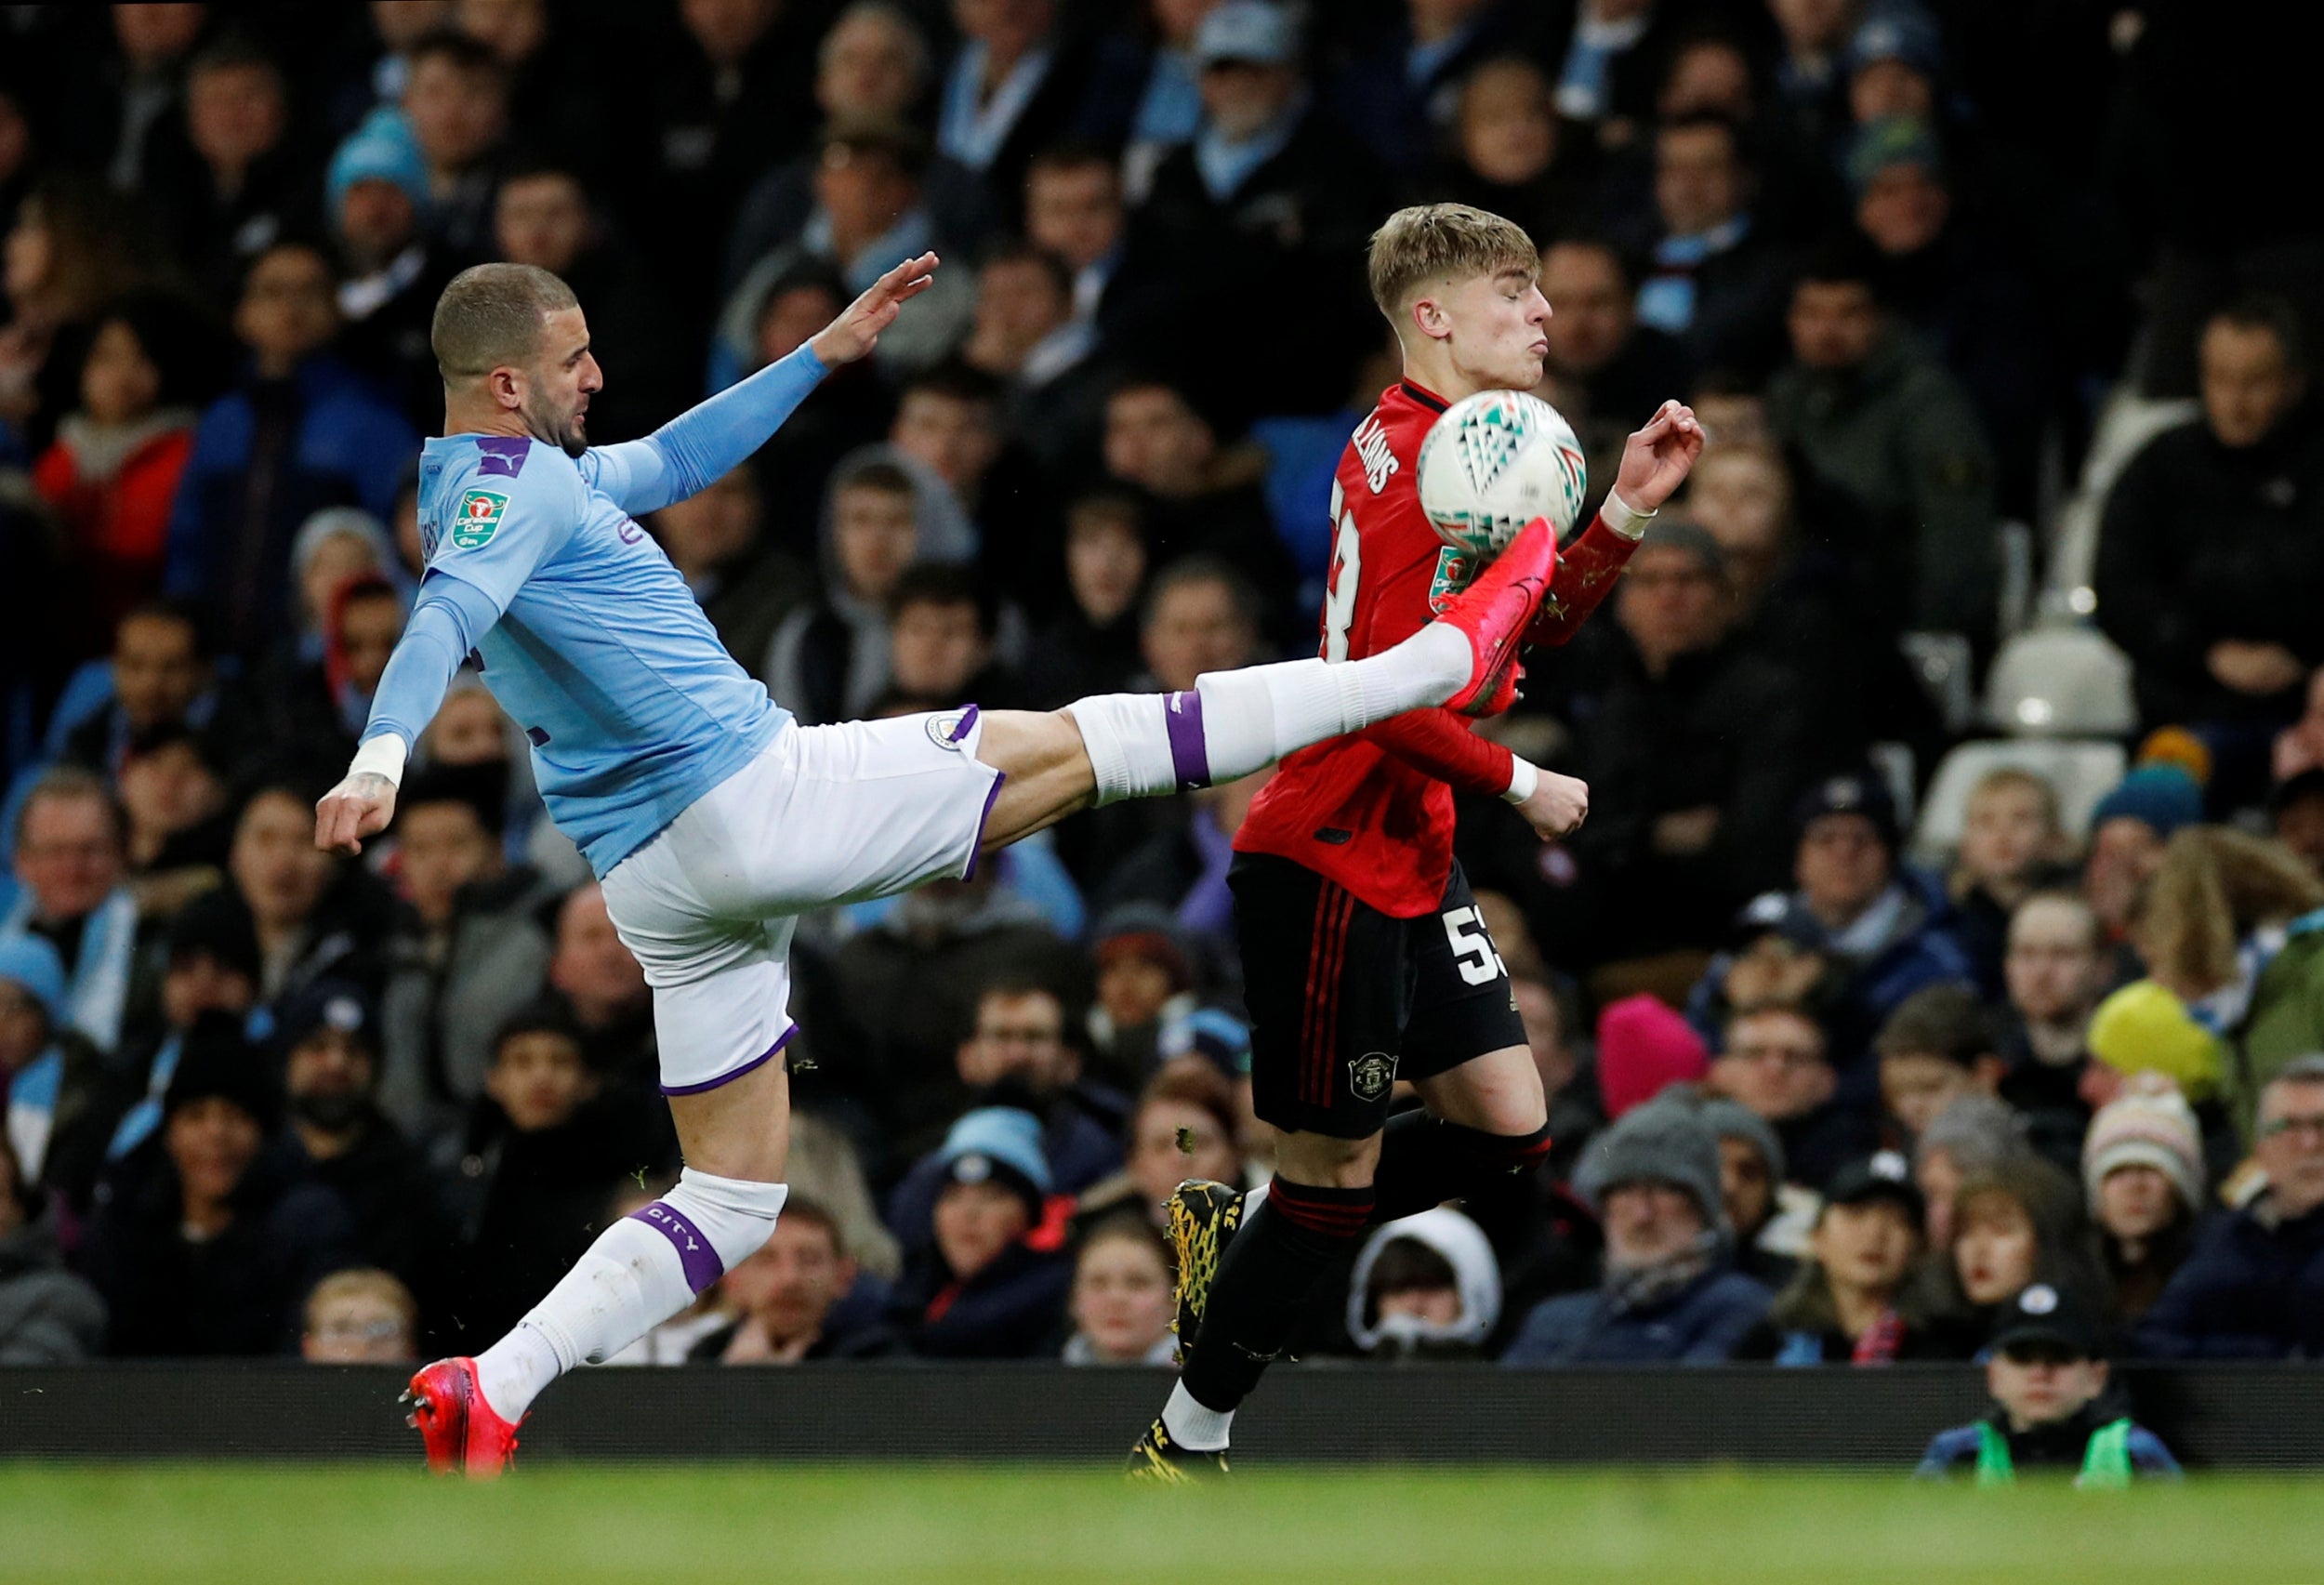 Man City vs Manchester United highlights: Watch the best of Carabao Cup